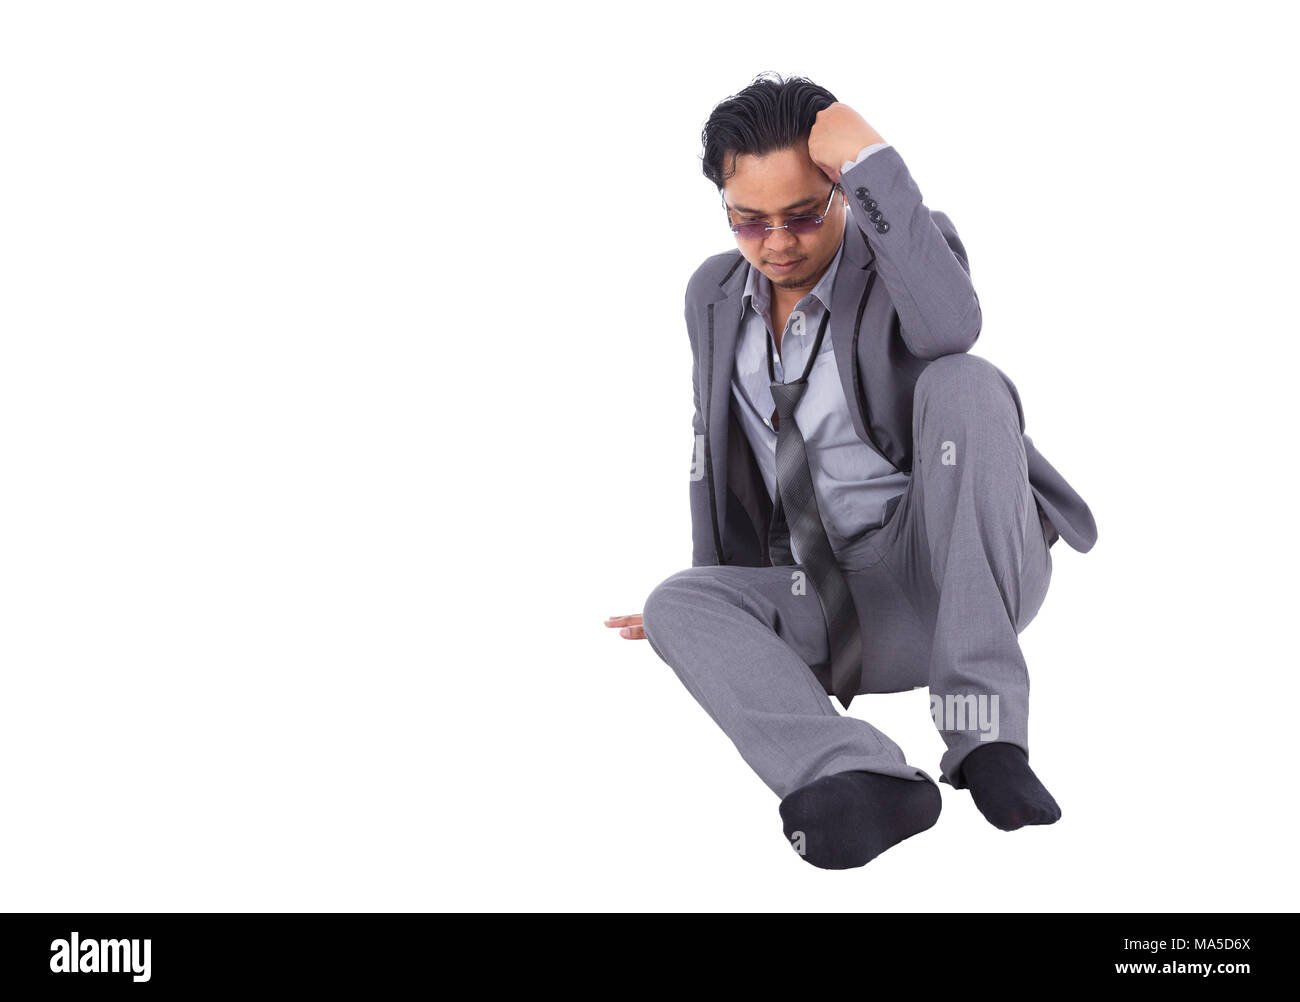 stressed businessman touching his head and thinking isolated on white background Stock Photo